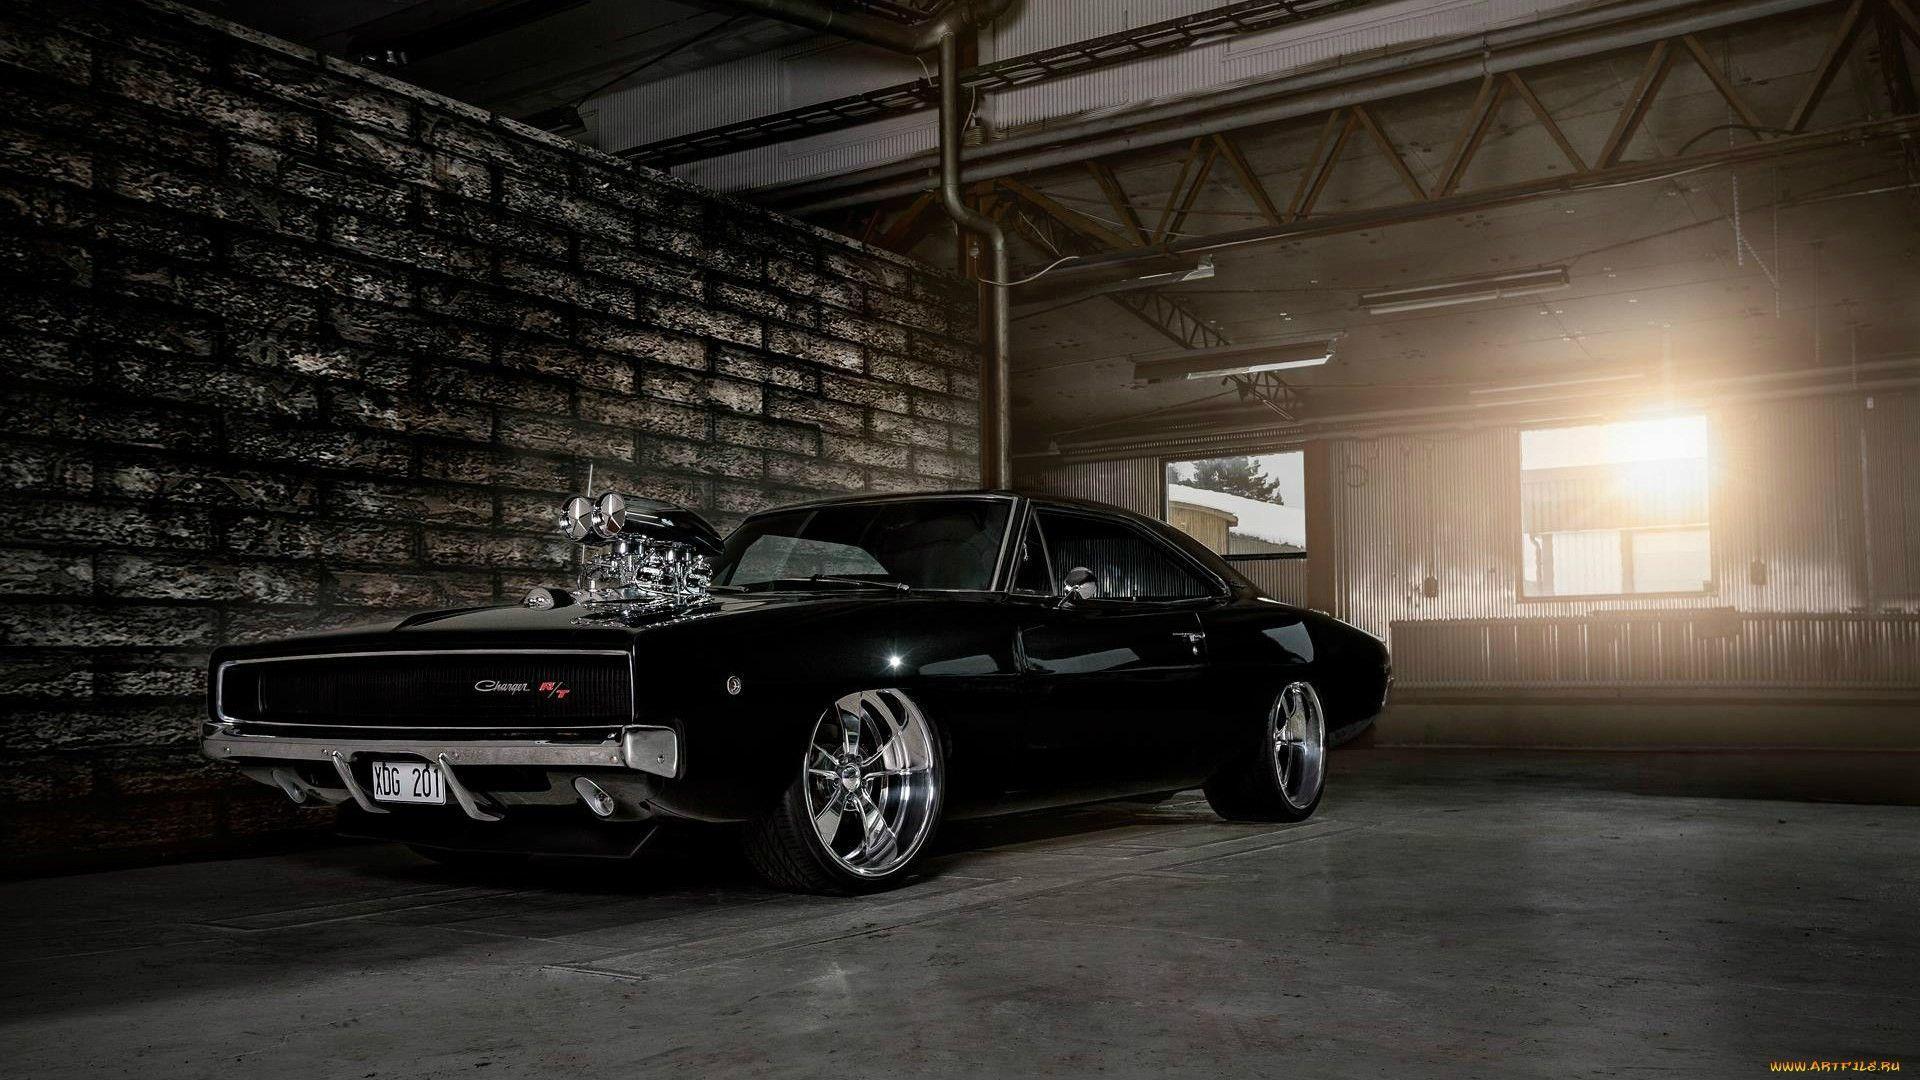 Dodge Charger Wallpaper. Free Wallpaper